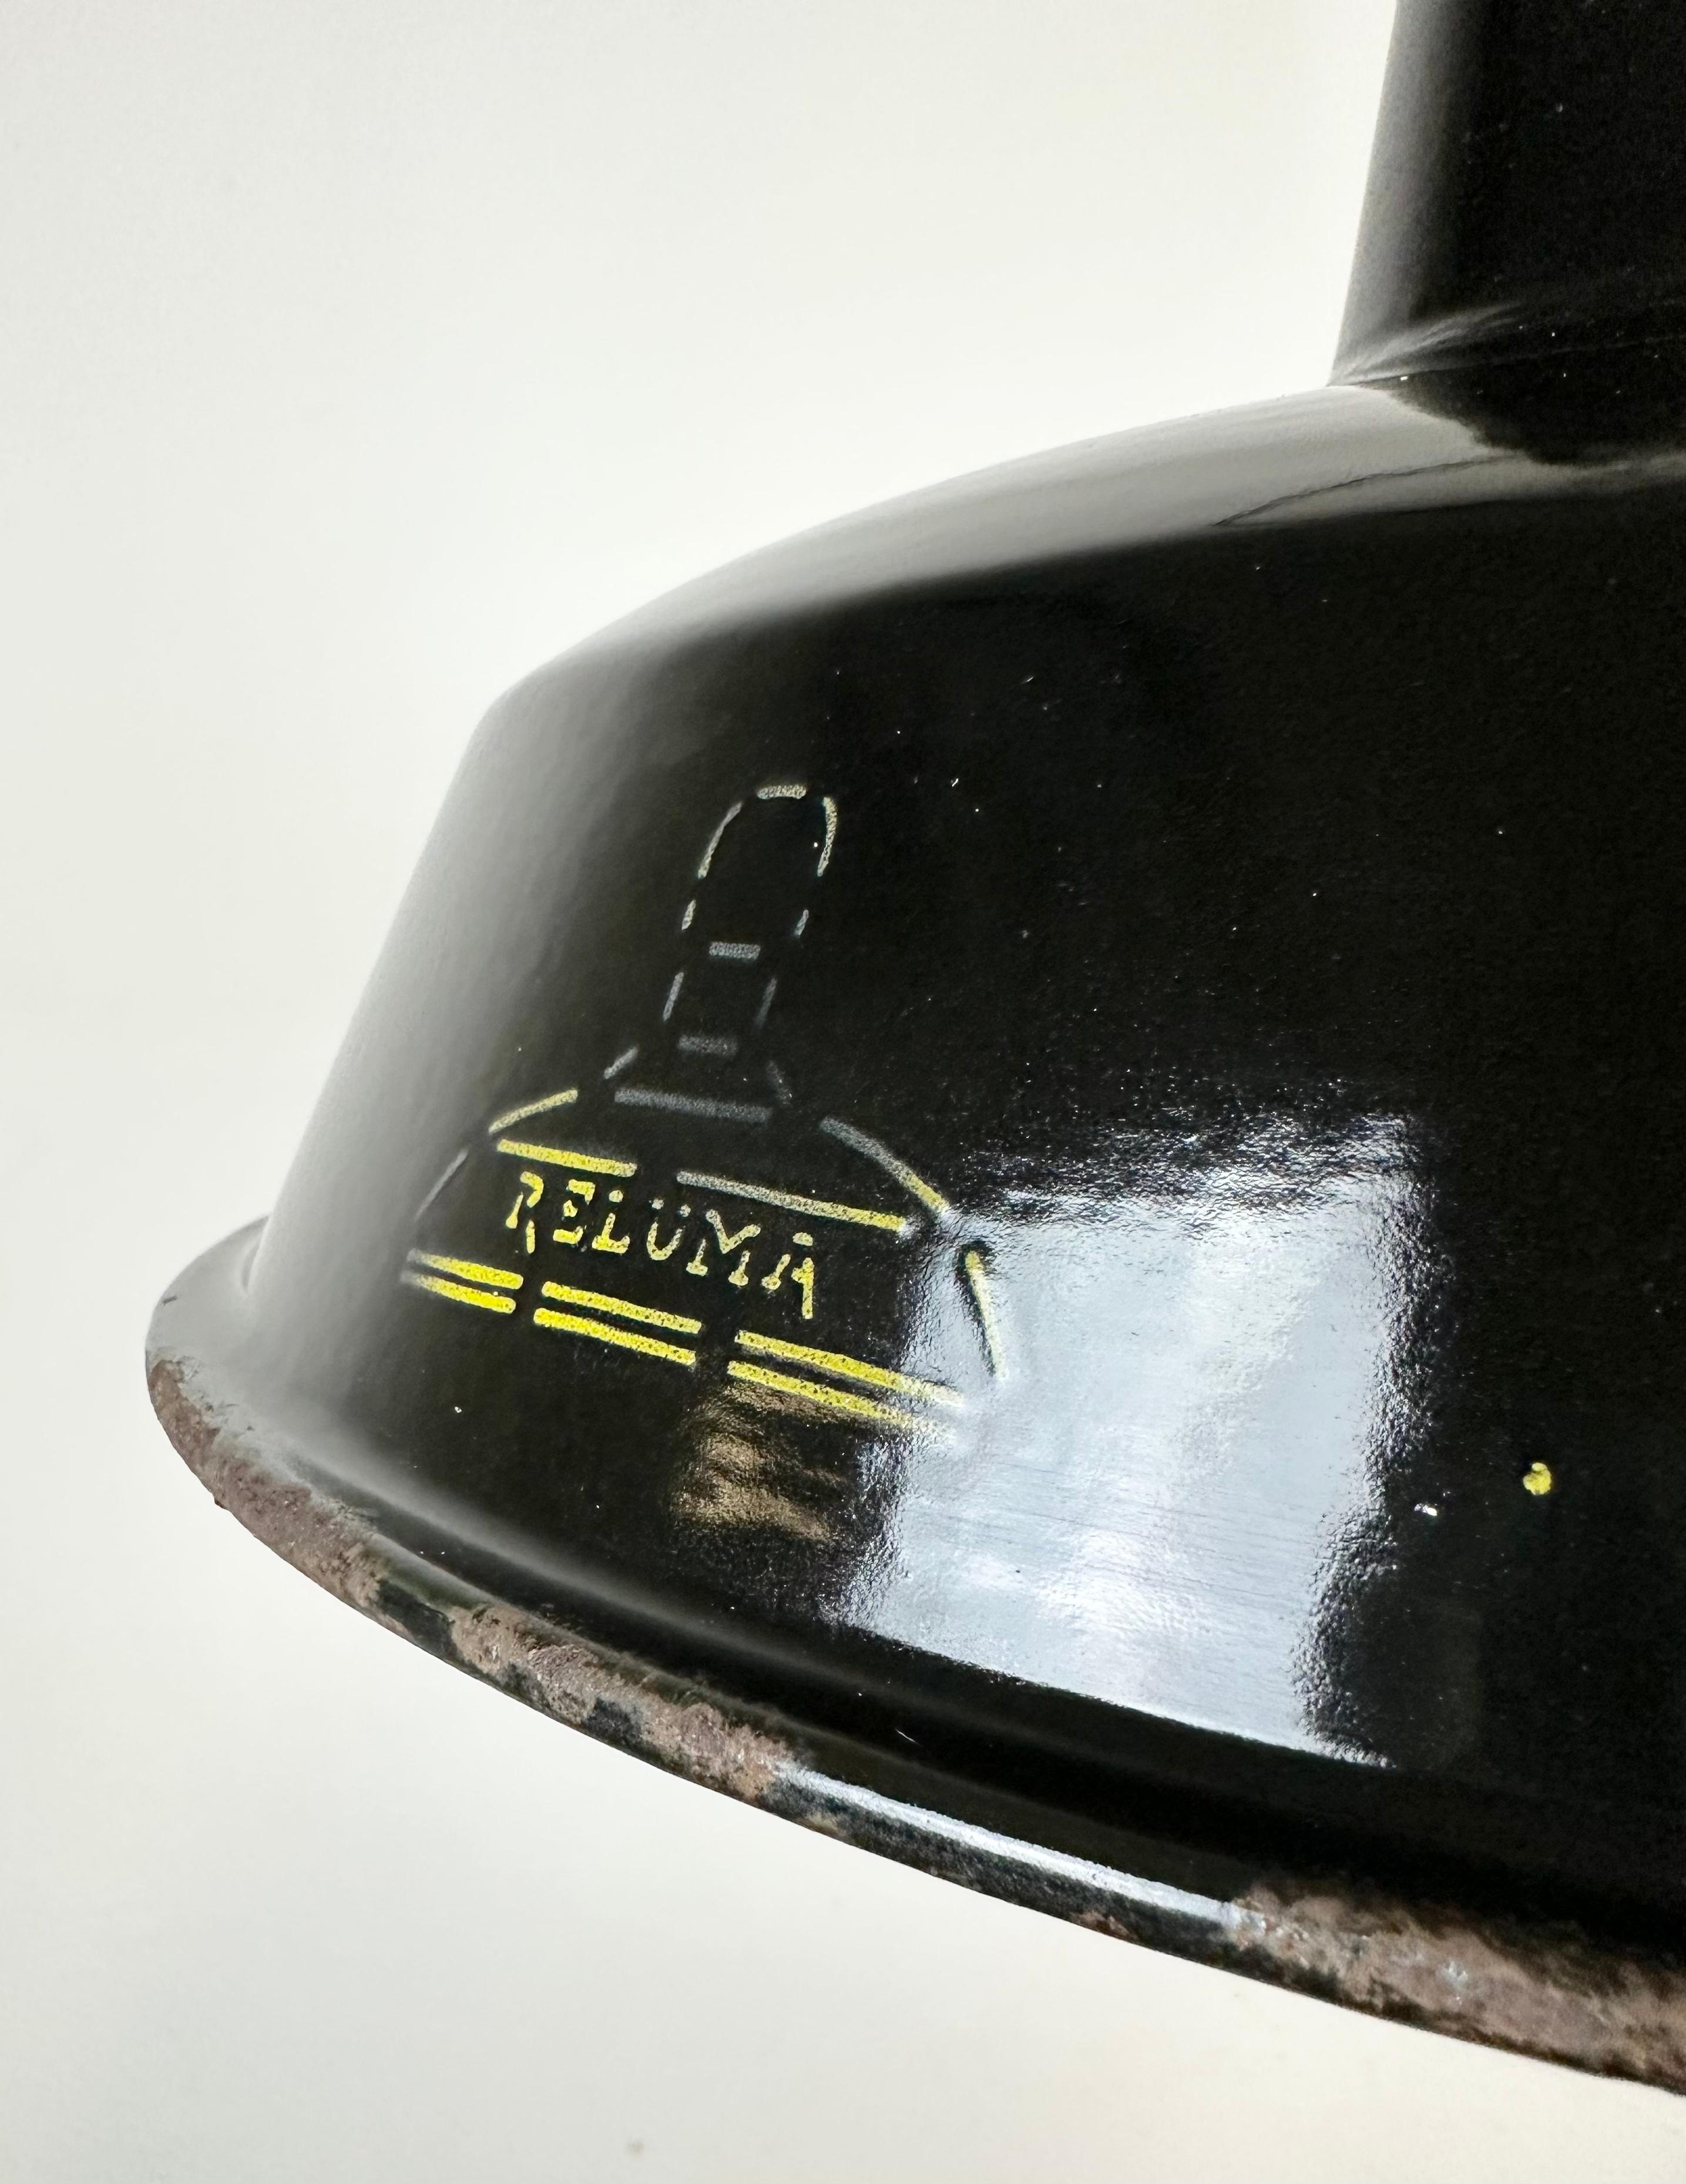 Industrial Black Enamel Hanging Lamp from Reluma, 1950s In Good Condition For Sale In Kojetice, CZ